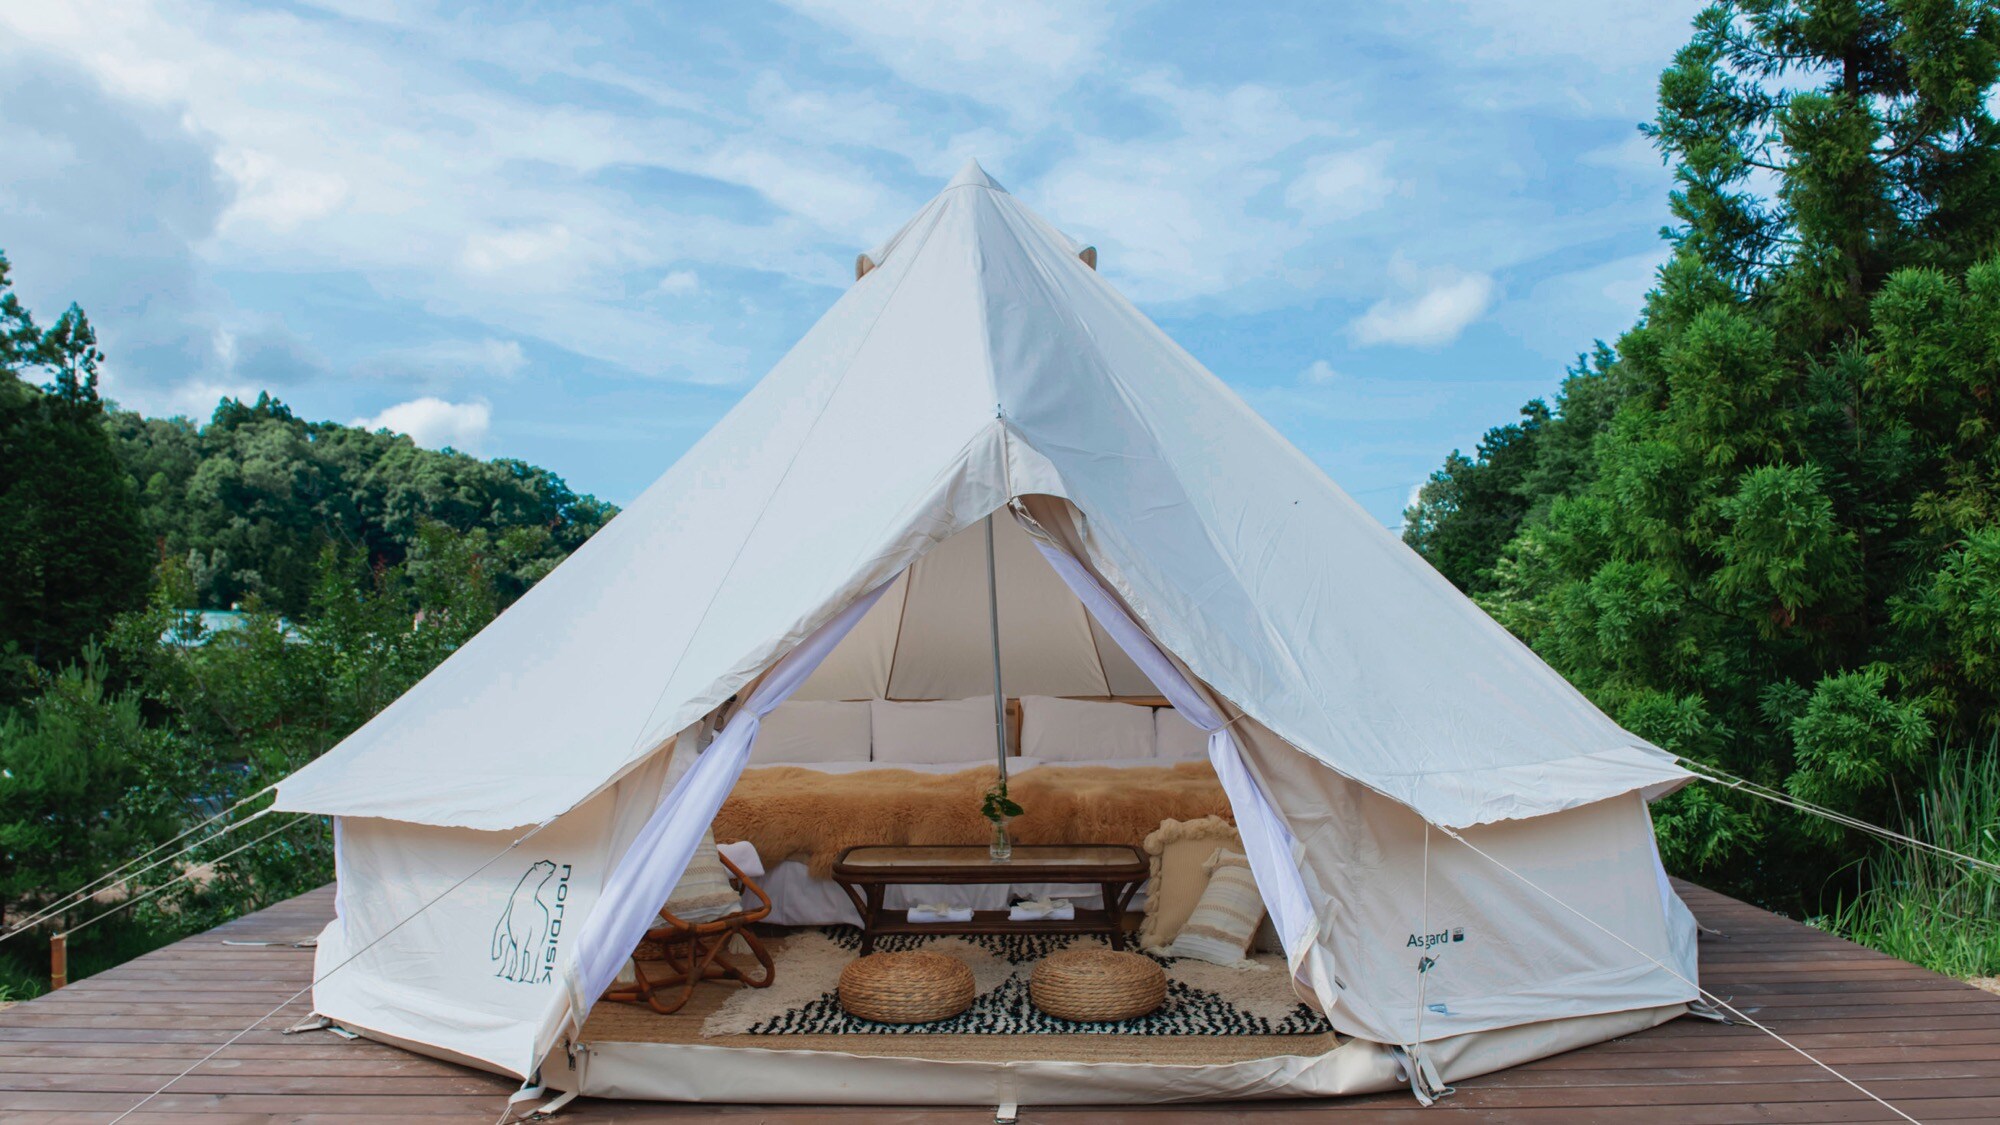 [An example of the appearance of the tent] This is a glamping facility surrounded by nature.